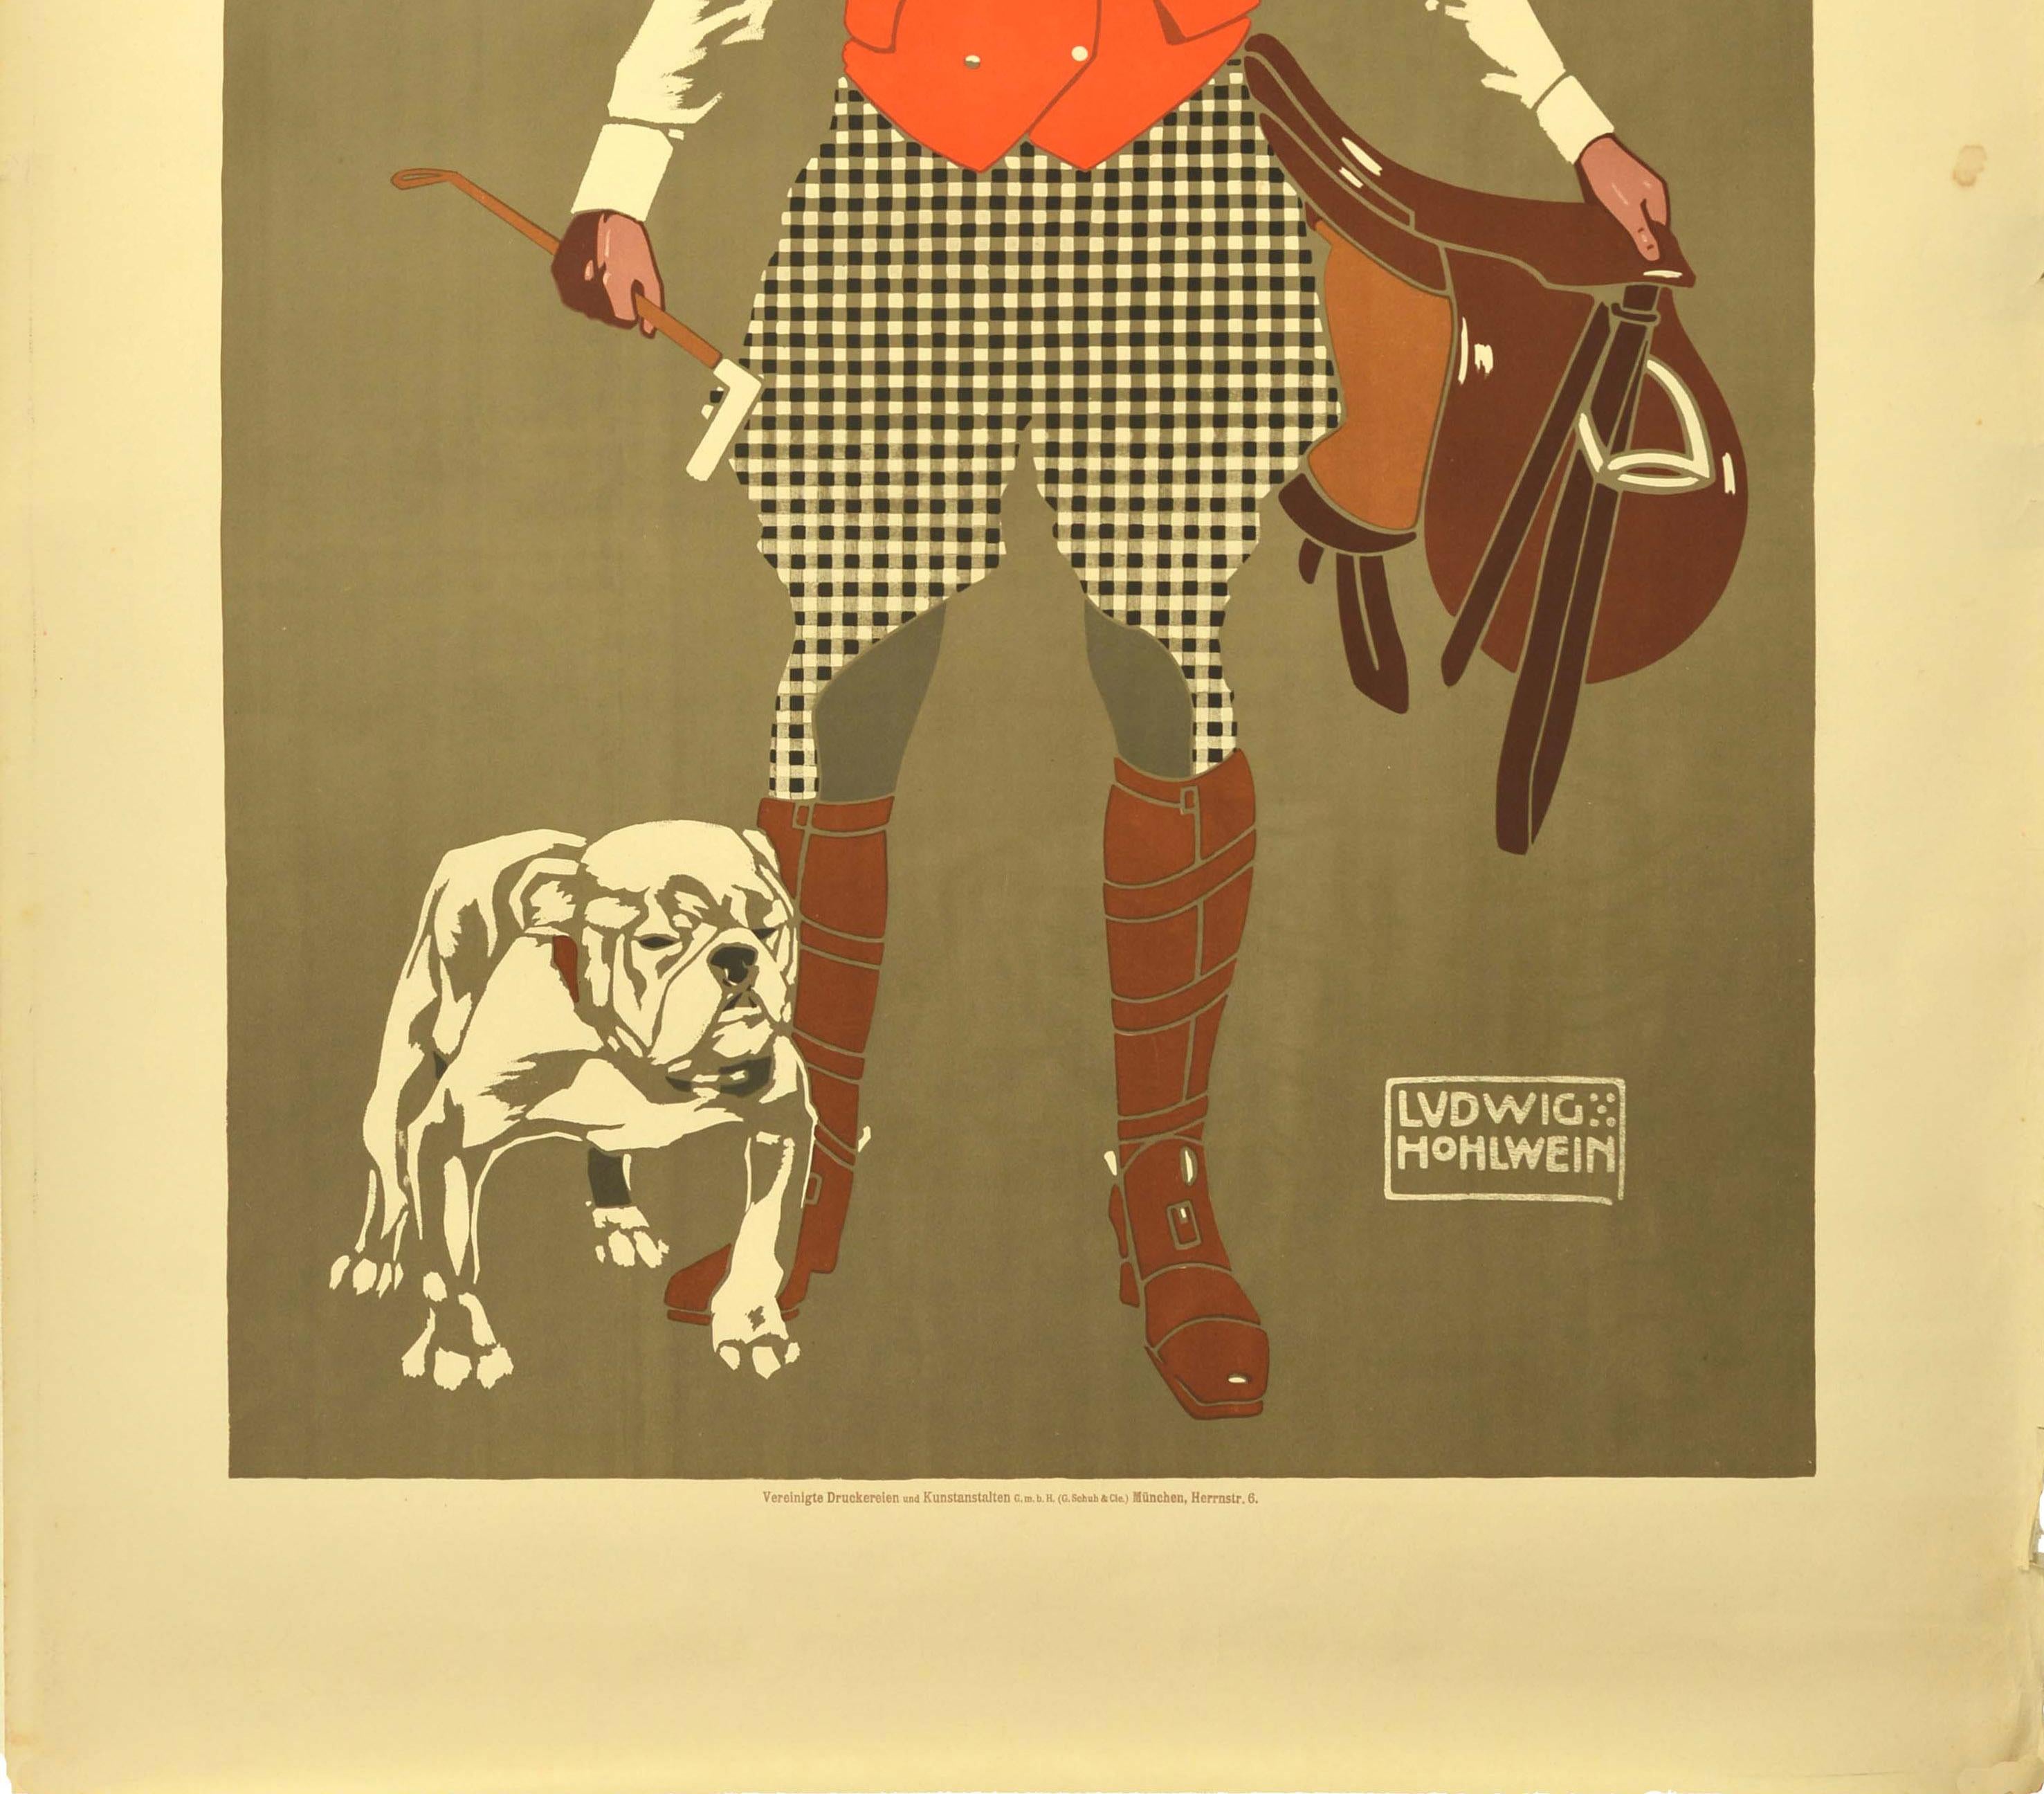 Original Antique Fashion Clothing Advertising Poster Hermann Scherrer Hohlwein In Good Condition For Sale In London, GB